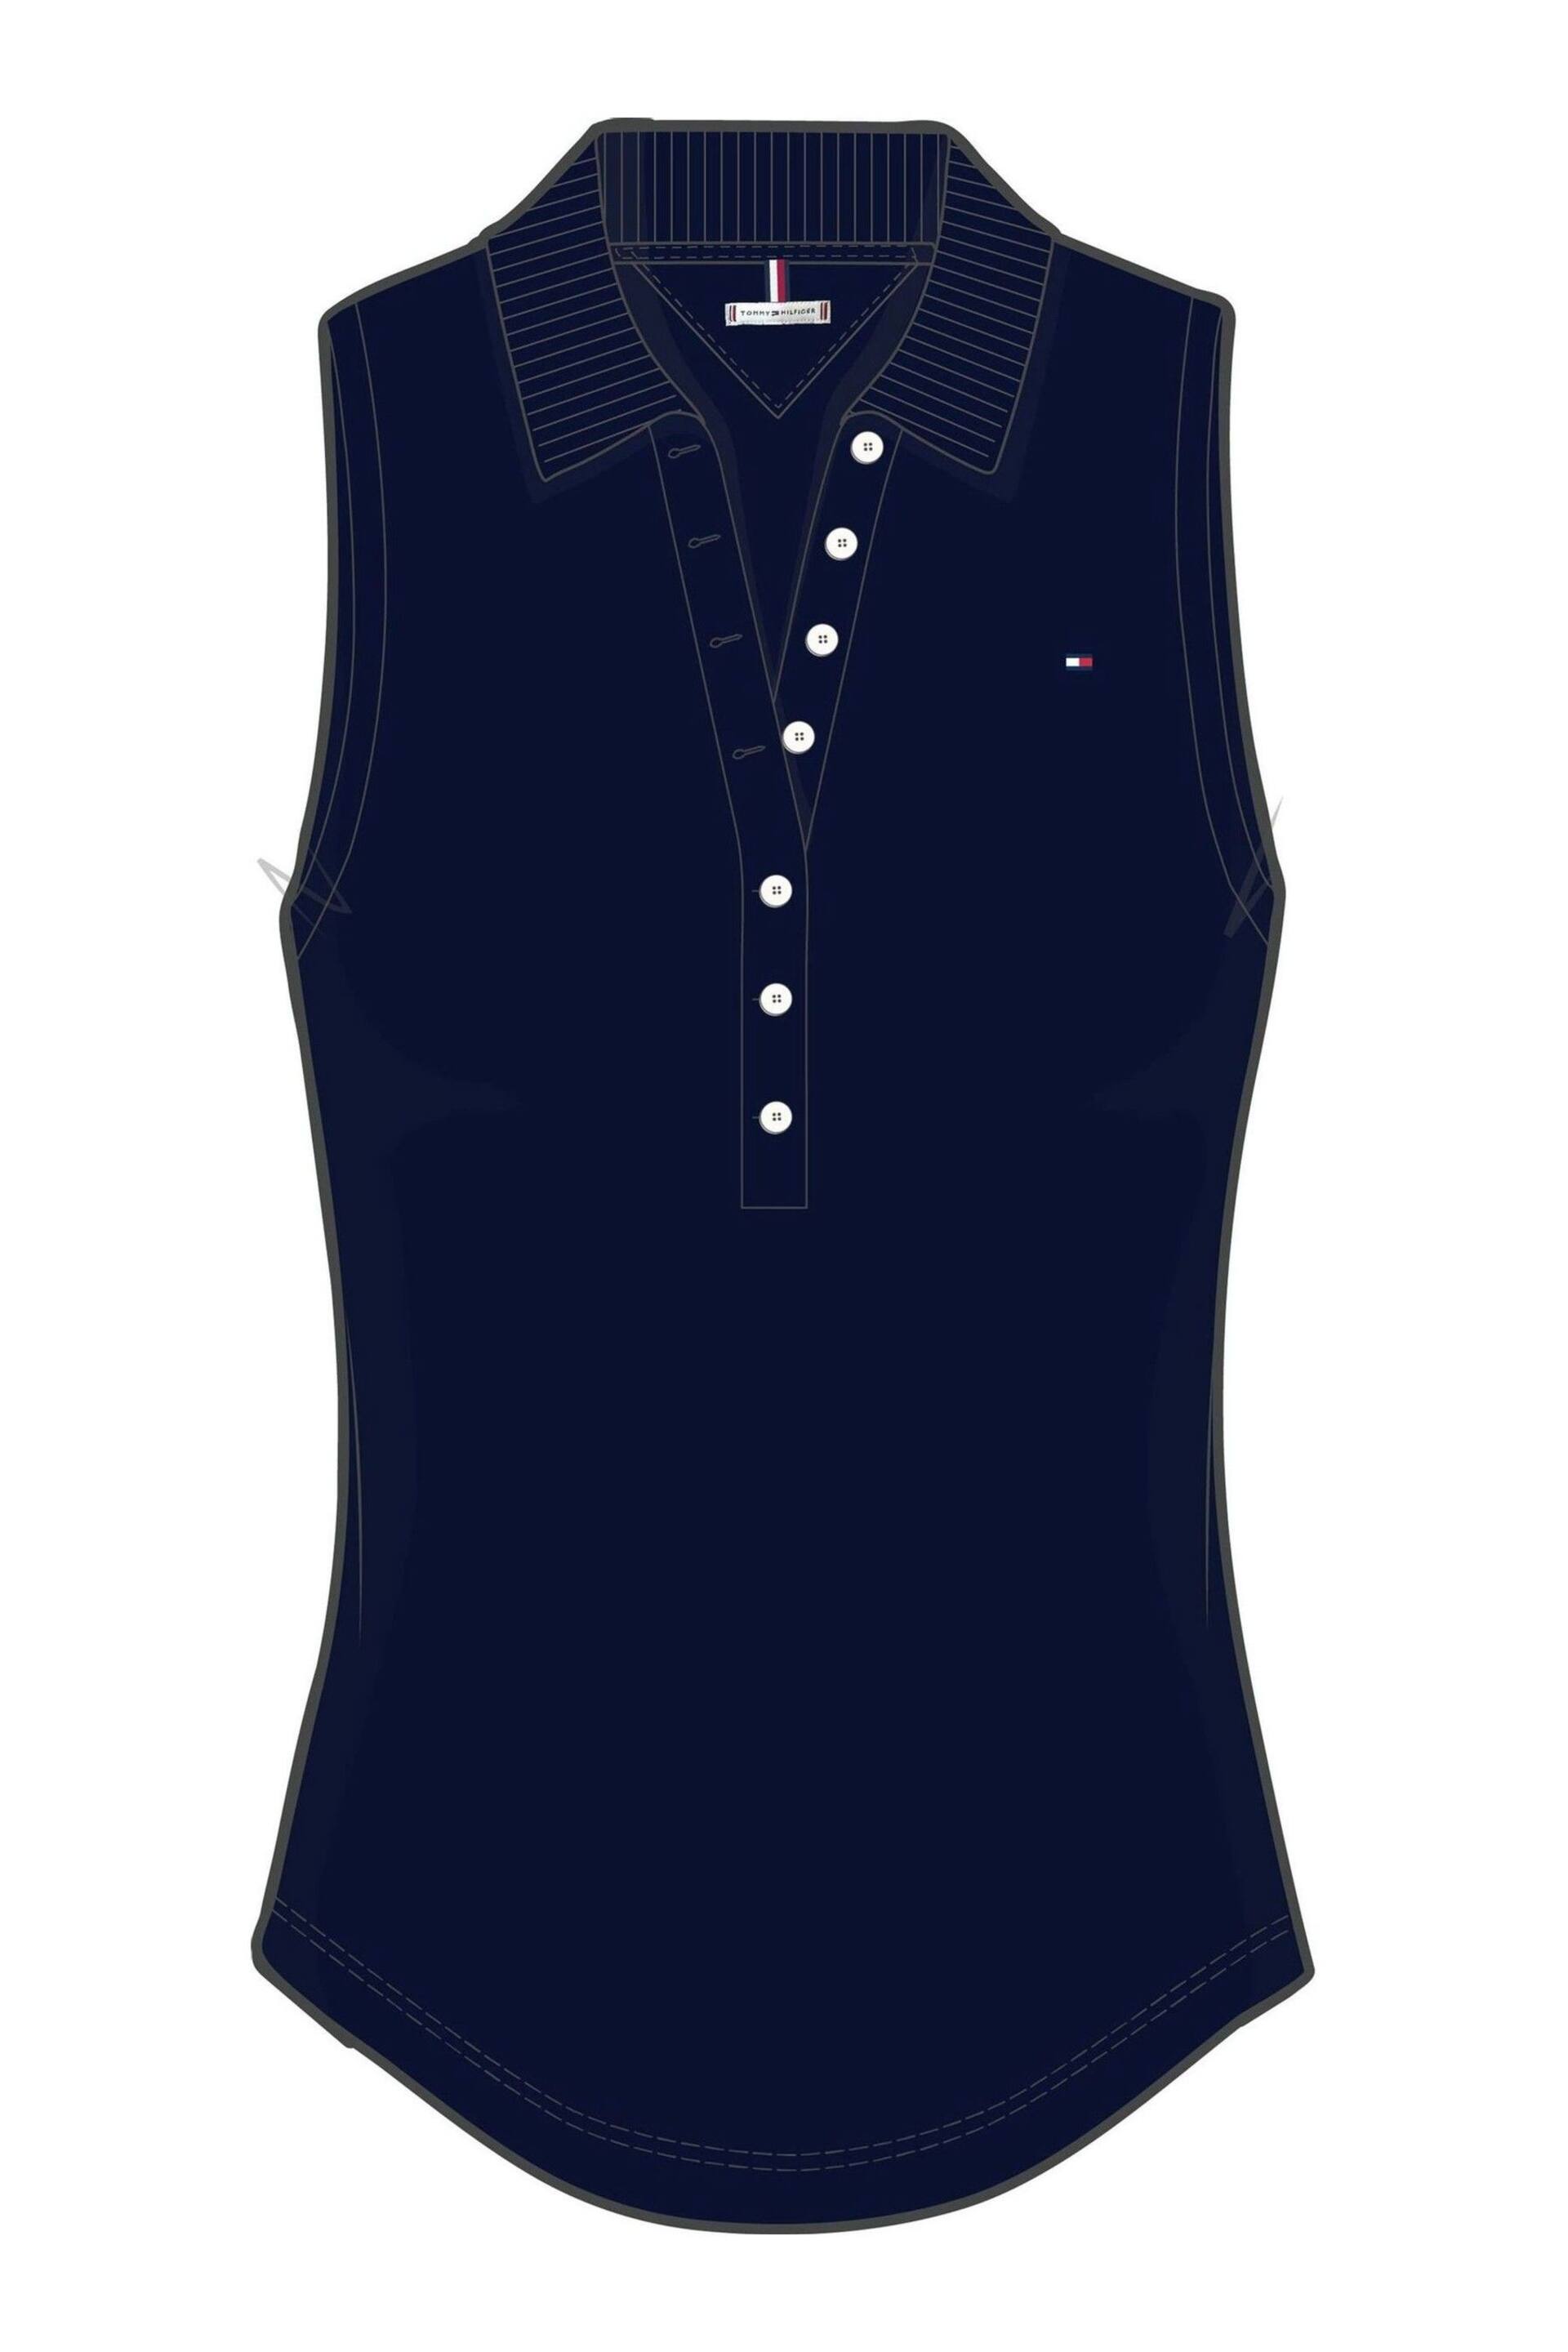 Tommy Hilfiger Blue1985 Sleeveless Polo Top - Image 5 of 5